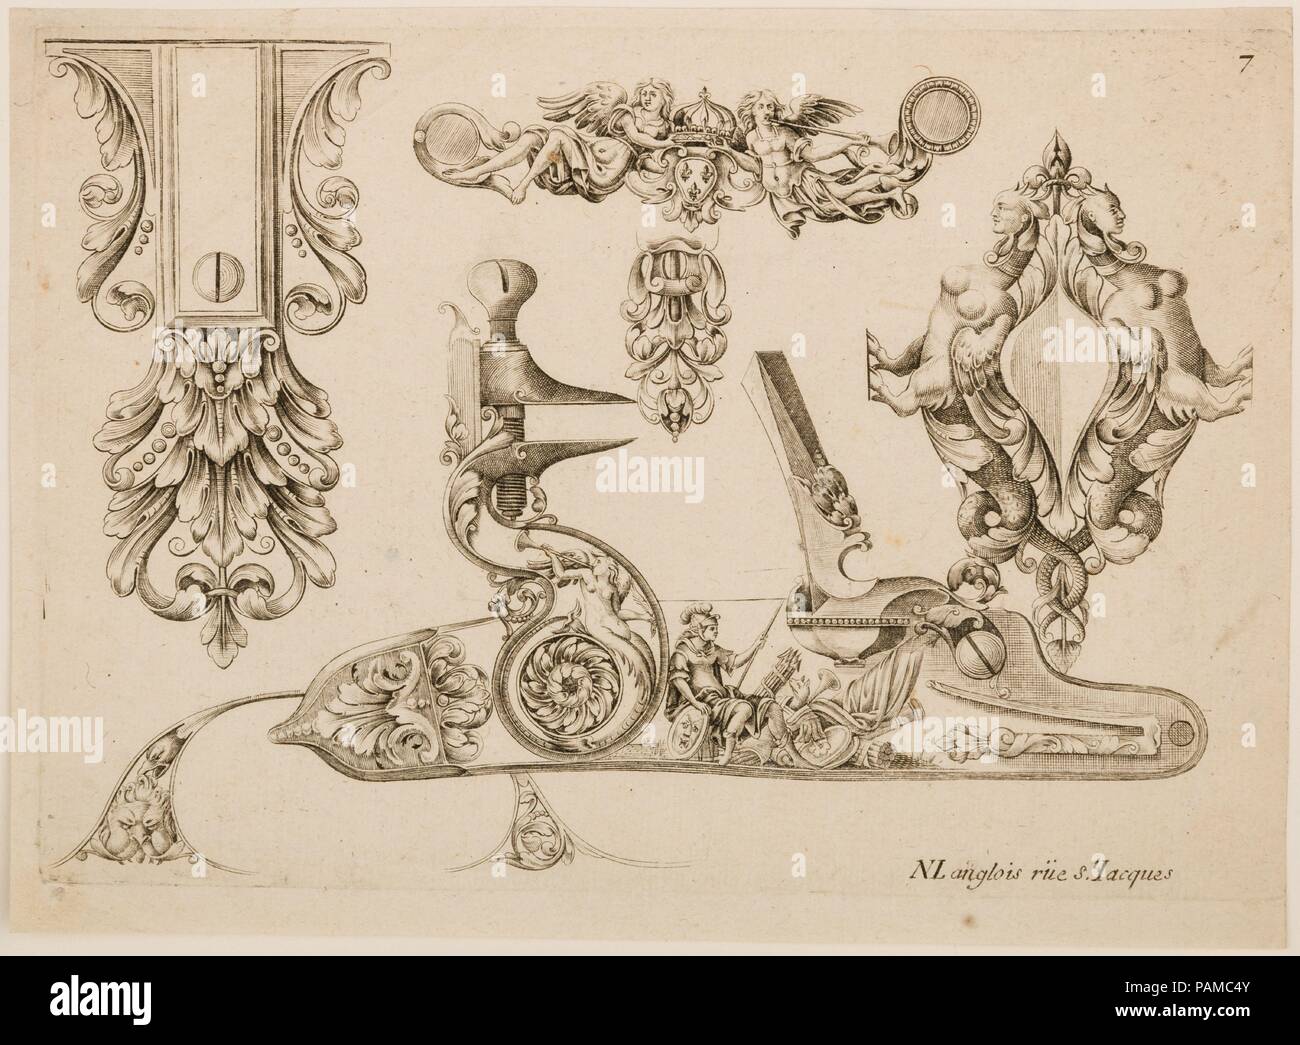 Plate Seven from Plusieurs Models des plus nouuelles manieres qui sont en usage en l'Art de Arquebuzerie. Culture: French, Paris. Dimensions: sheet: 7 1/2 x 5 1/2 in. (19.1 x 14 cm). Engraver: C. Jacquinet (French, Paris, active mid-17th century). Publisher: Thuraine (French, Paris, active mid-17th century); Le Hollandois (French, Paris, active mid-17th century). Date: ca. 1660.  Little is known about the royal gunmakers, Thuraine and Le Hollandois, whose pattern book remains a rare and important document of Parisian gunmaking and the leading style of firearms ornament early in the reign of Lo Stock Photo